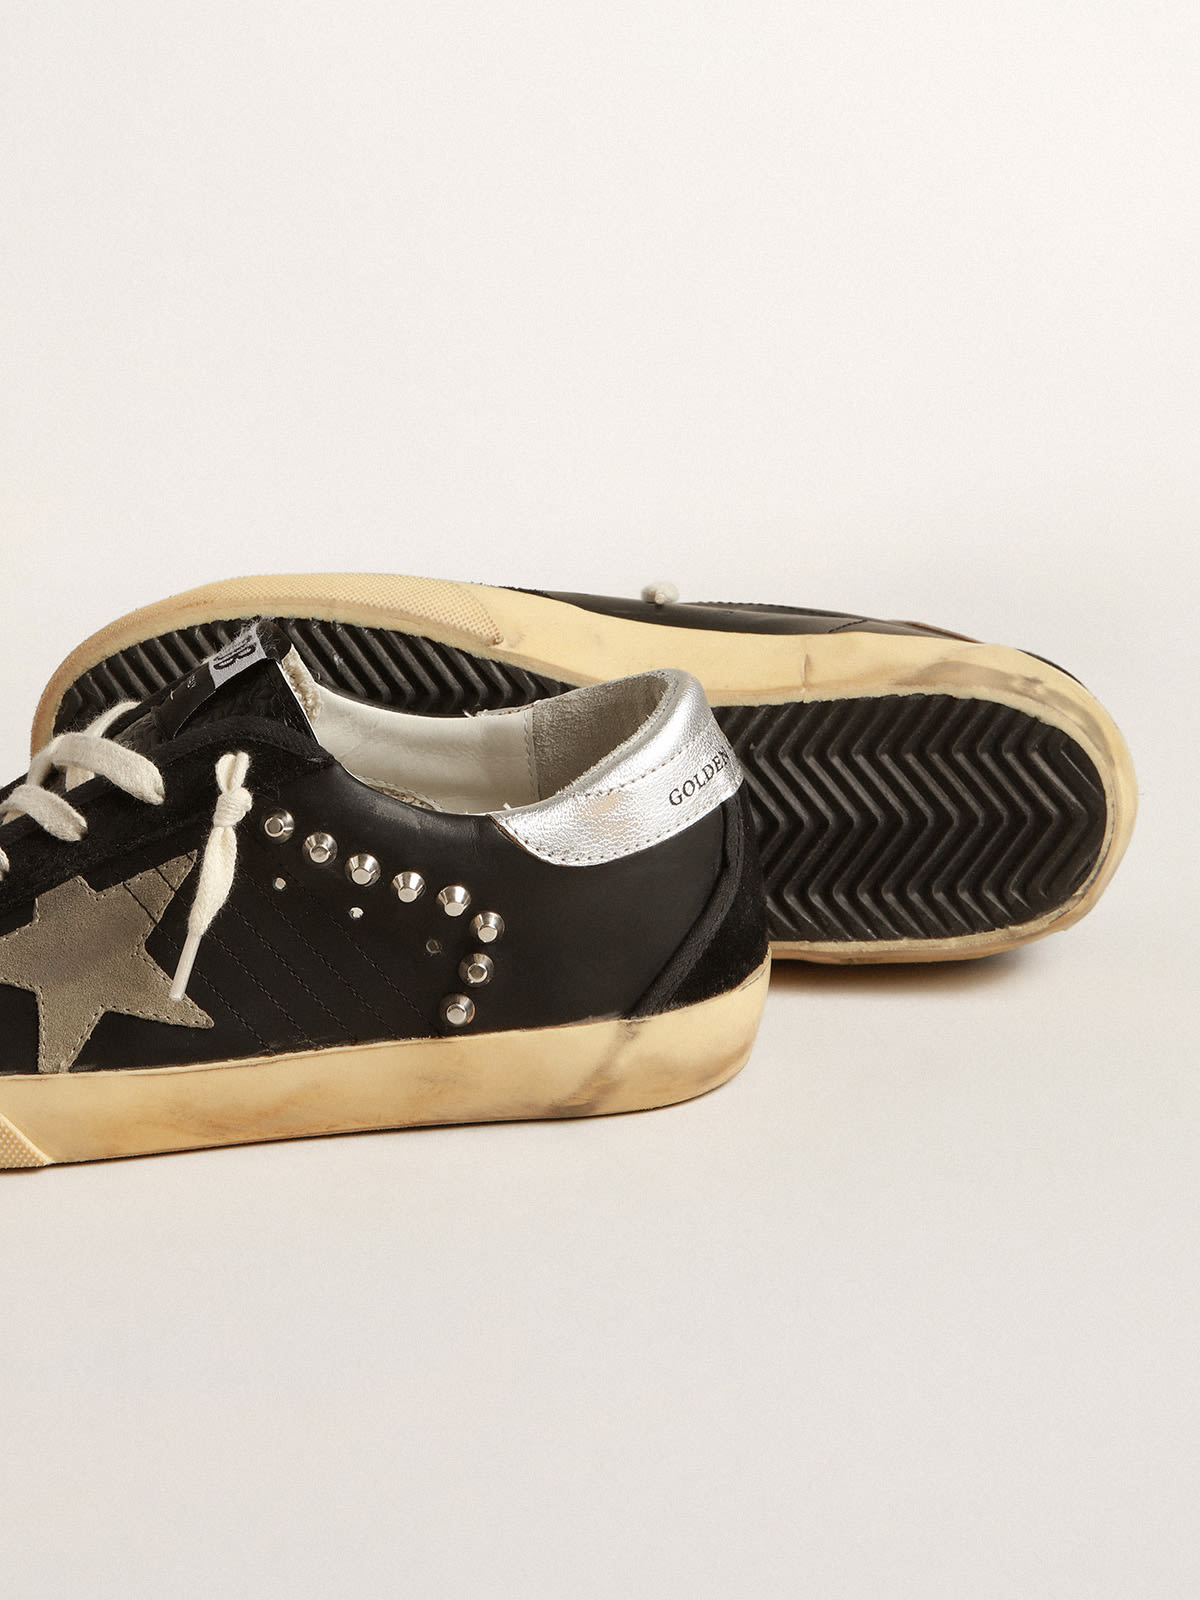 Golden Goose - Women’s Super-Star in black leather and suede with silver studs in 